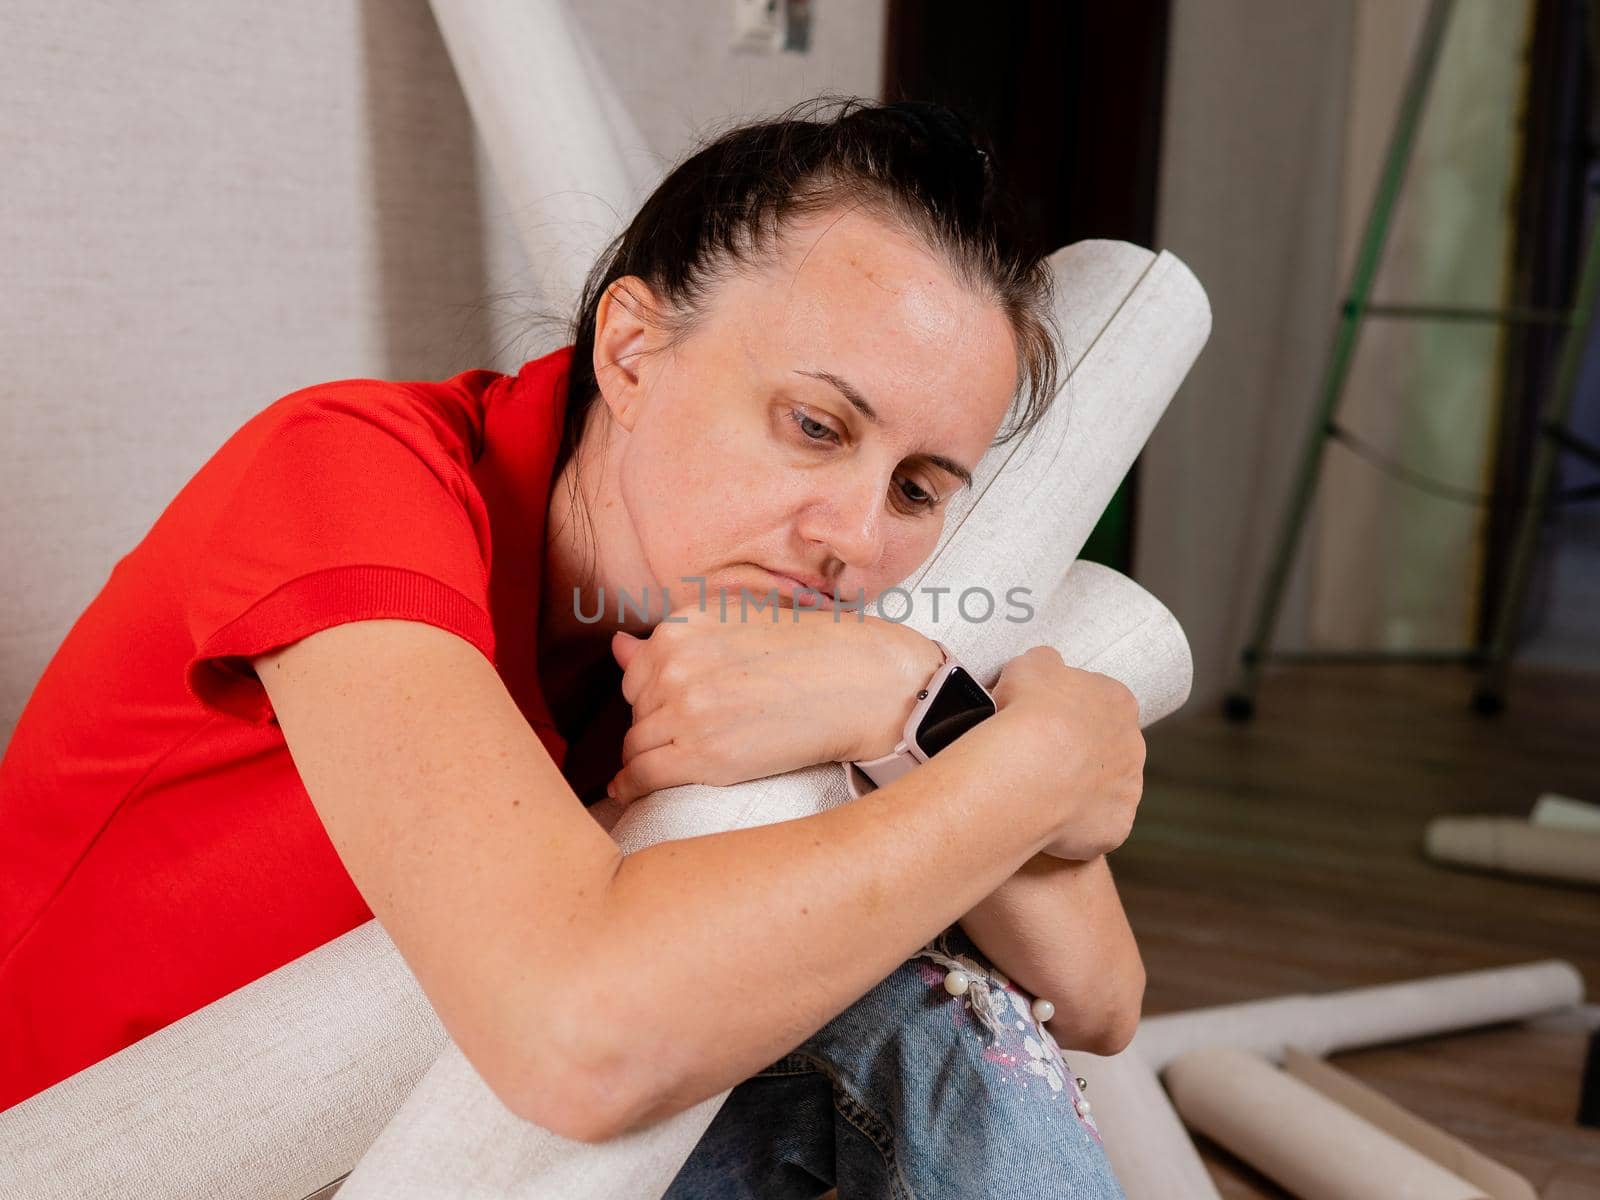 Portrait of a tired and sad woman sitting on the floor with rolls of Wallpaper in her hands. by Utlanov